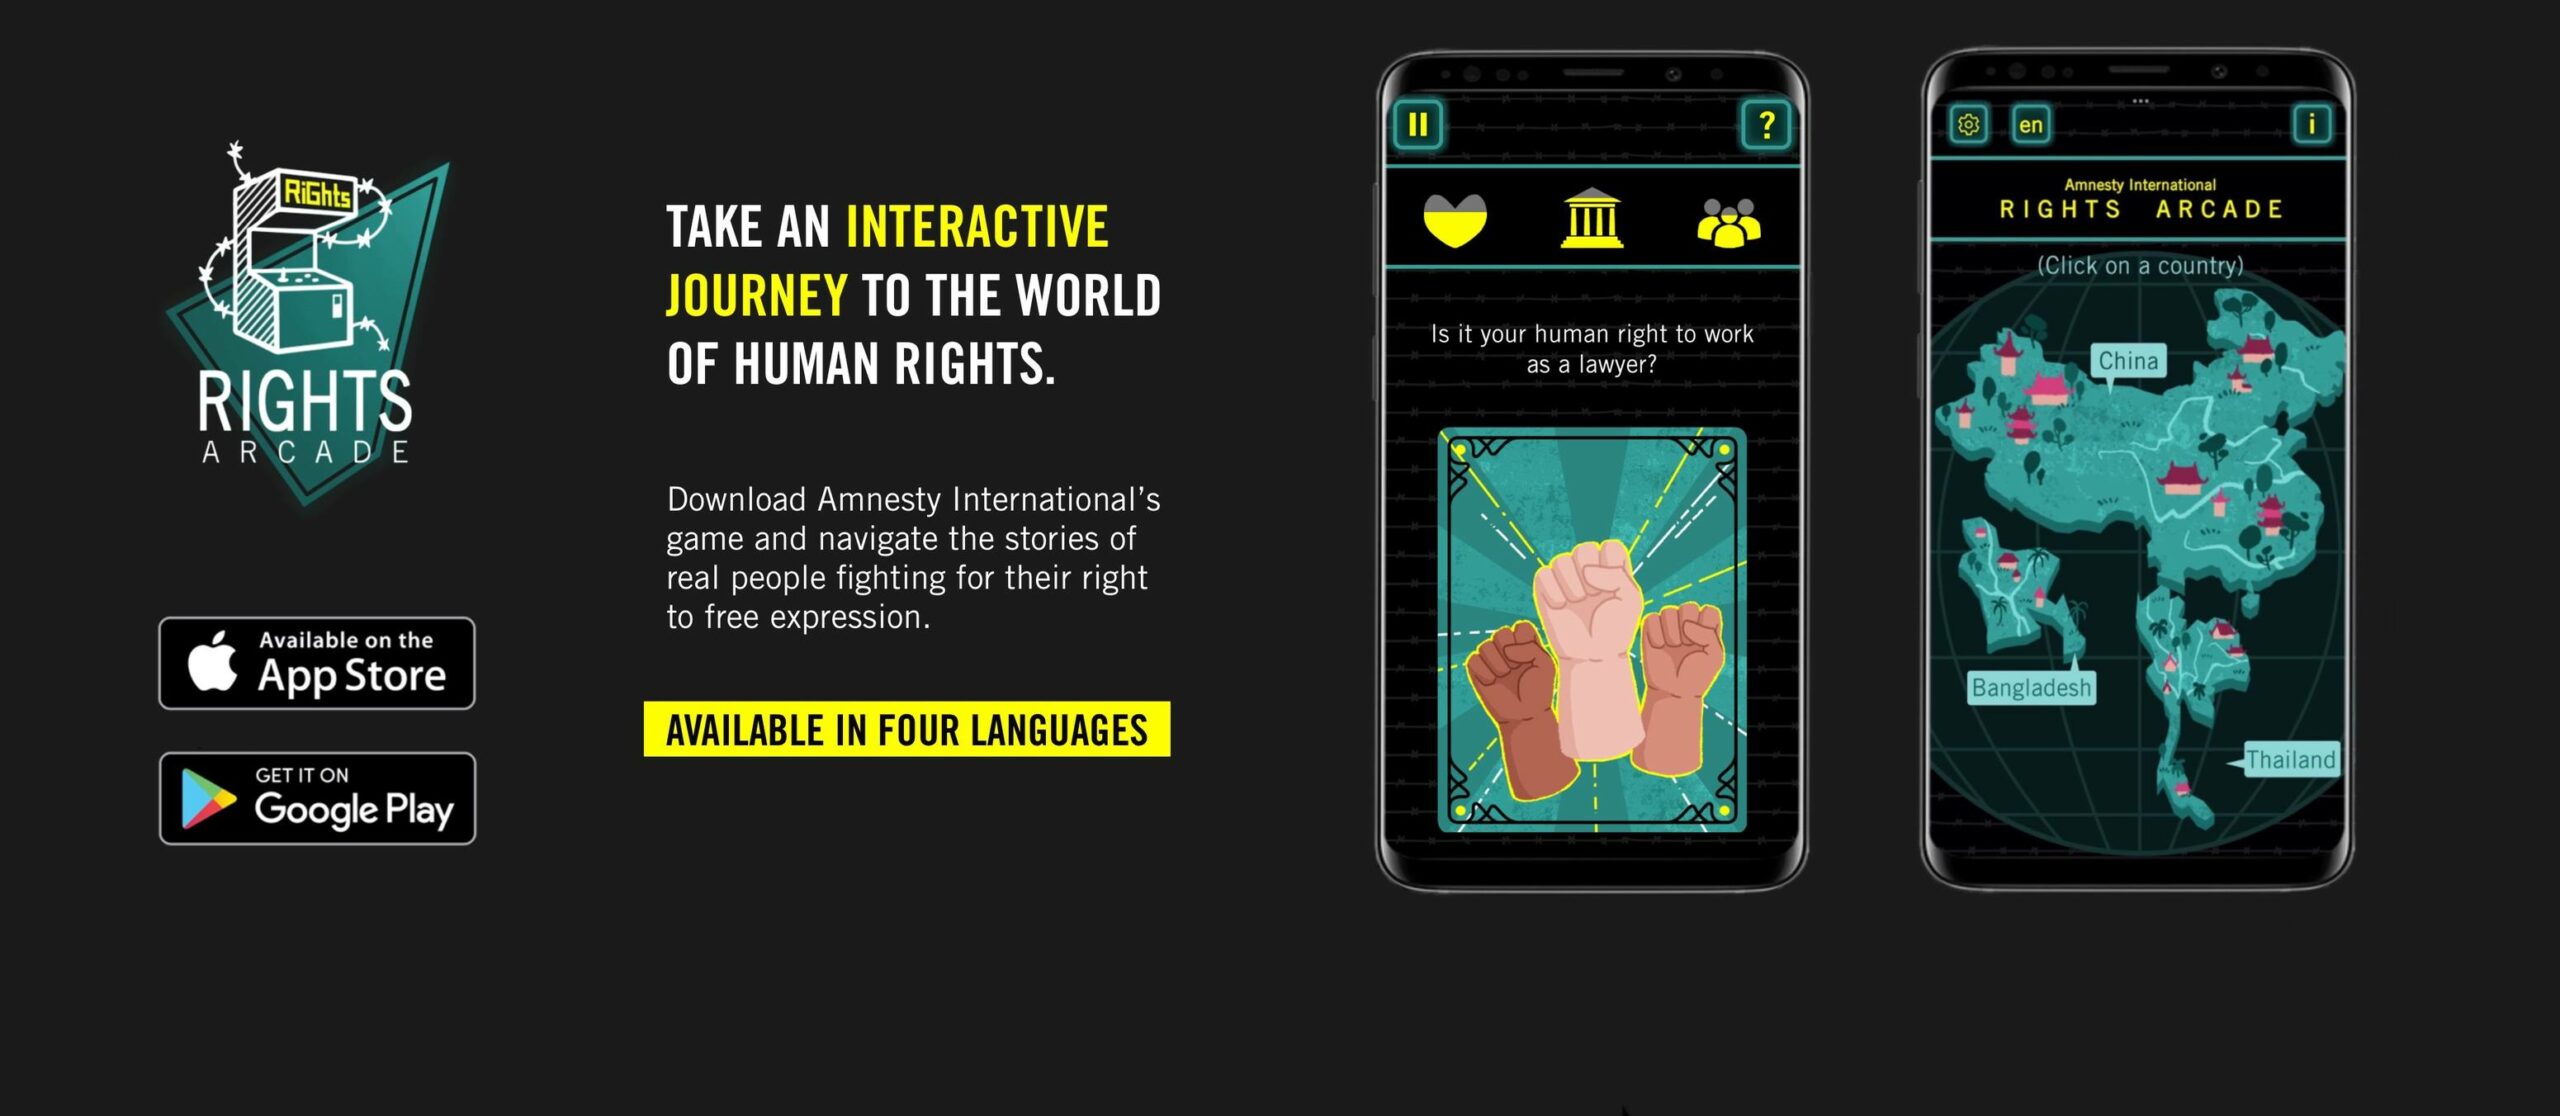 Amnesty International launches Rights Arcade game app to make human rights learning accessible